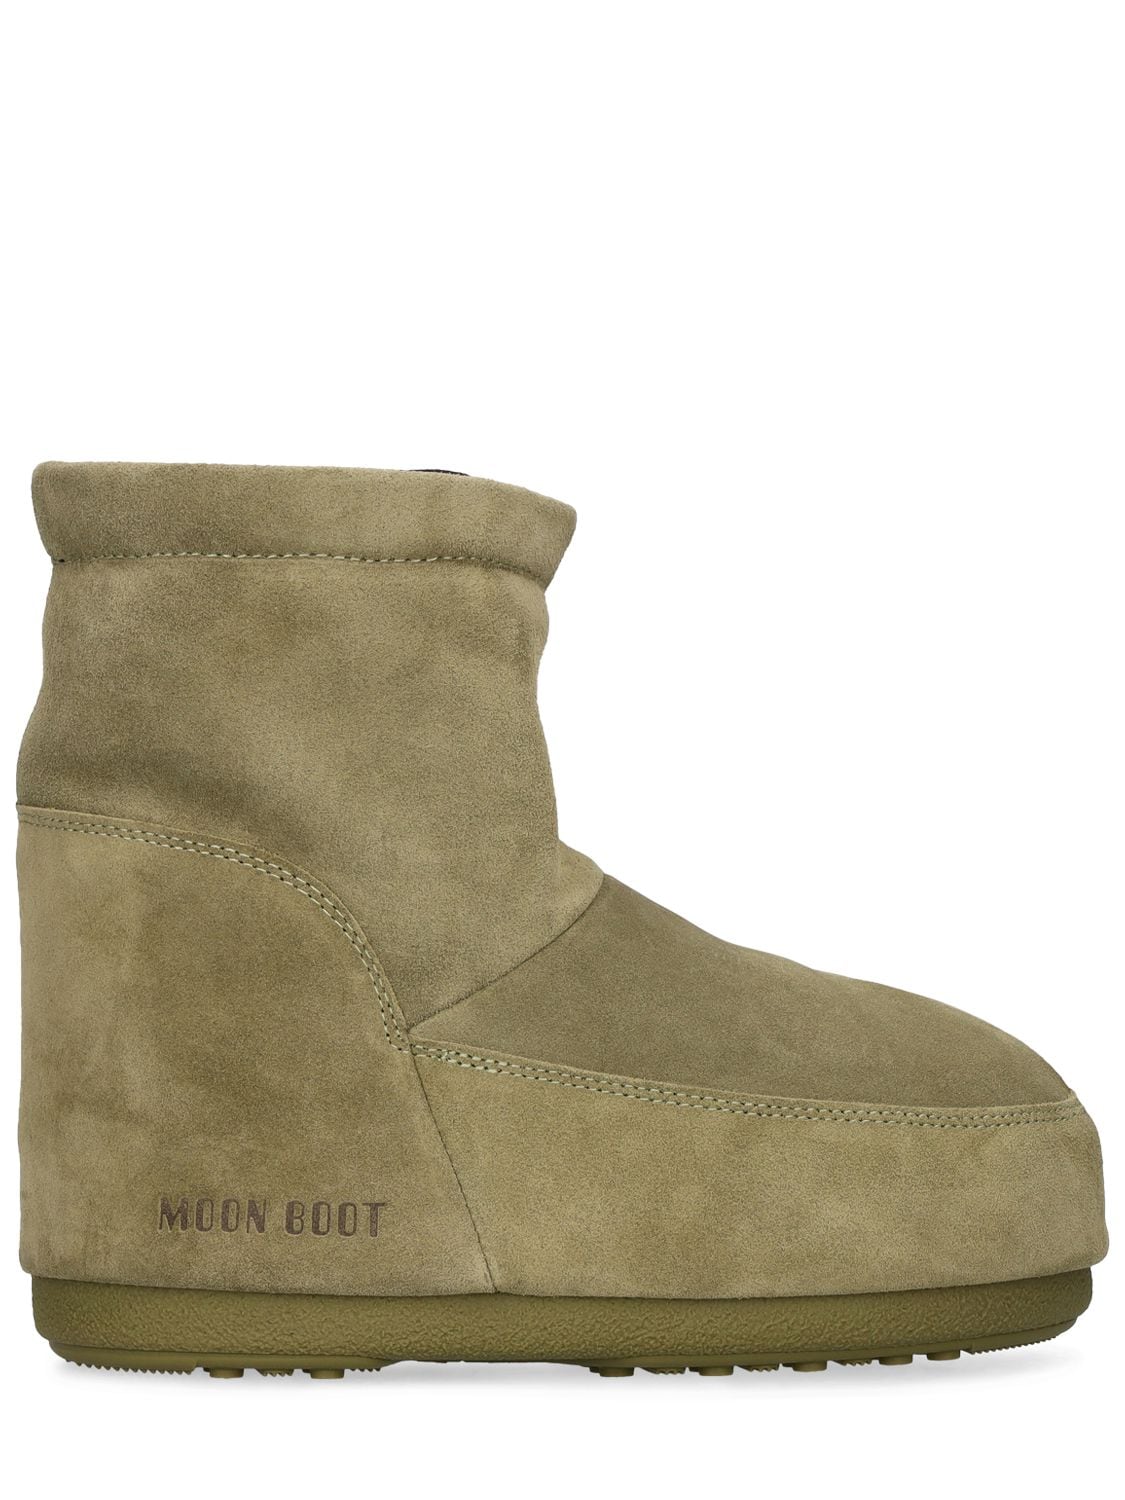 MOON BOOT ICON LOW NO-LACE SUEDE MOON BOOTS